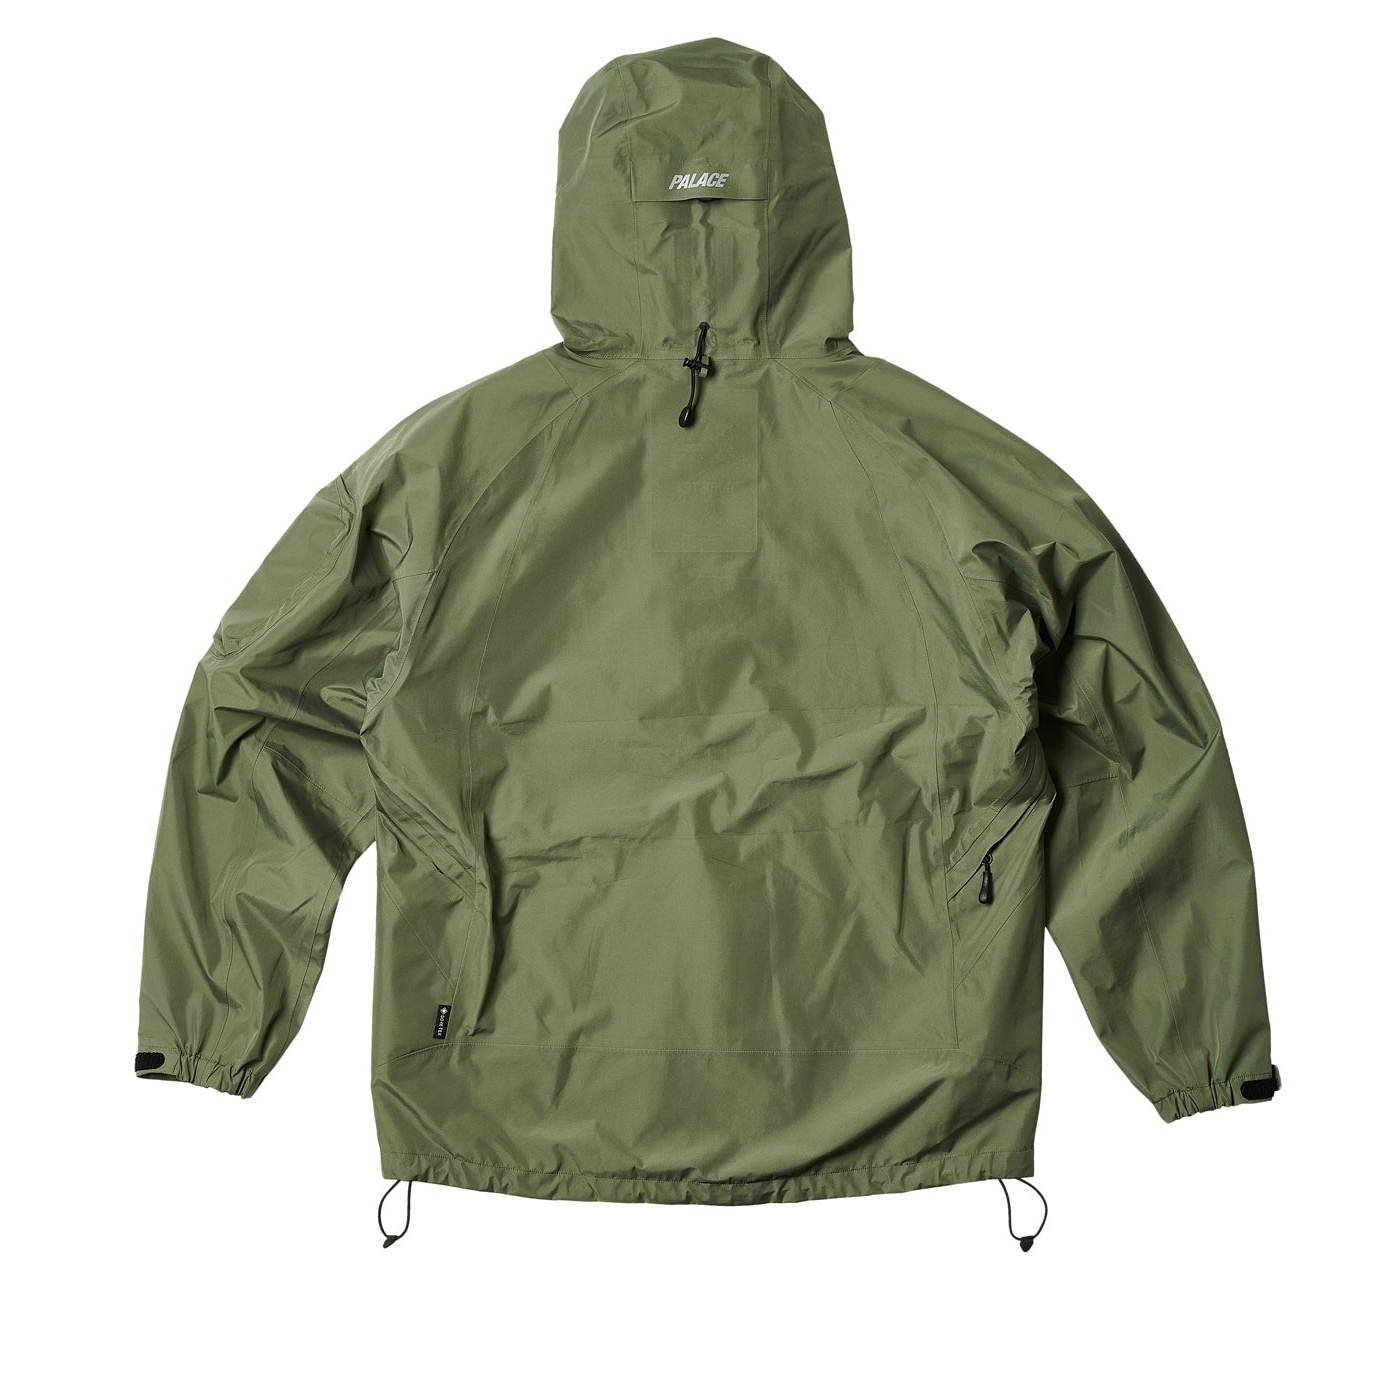 Thumbnail GORE-TEX CARGO JACKET OLIVE one color